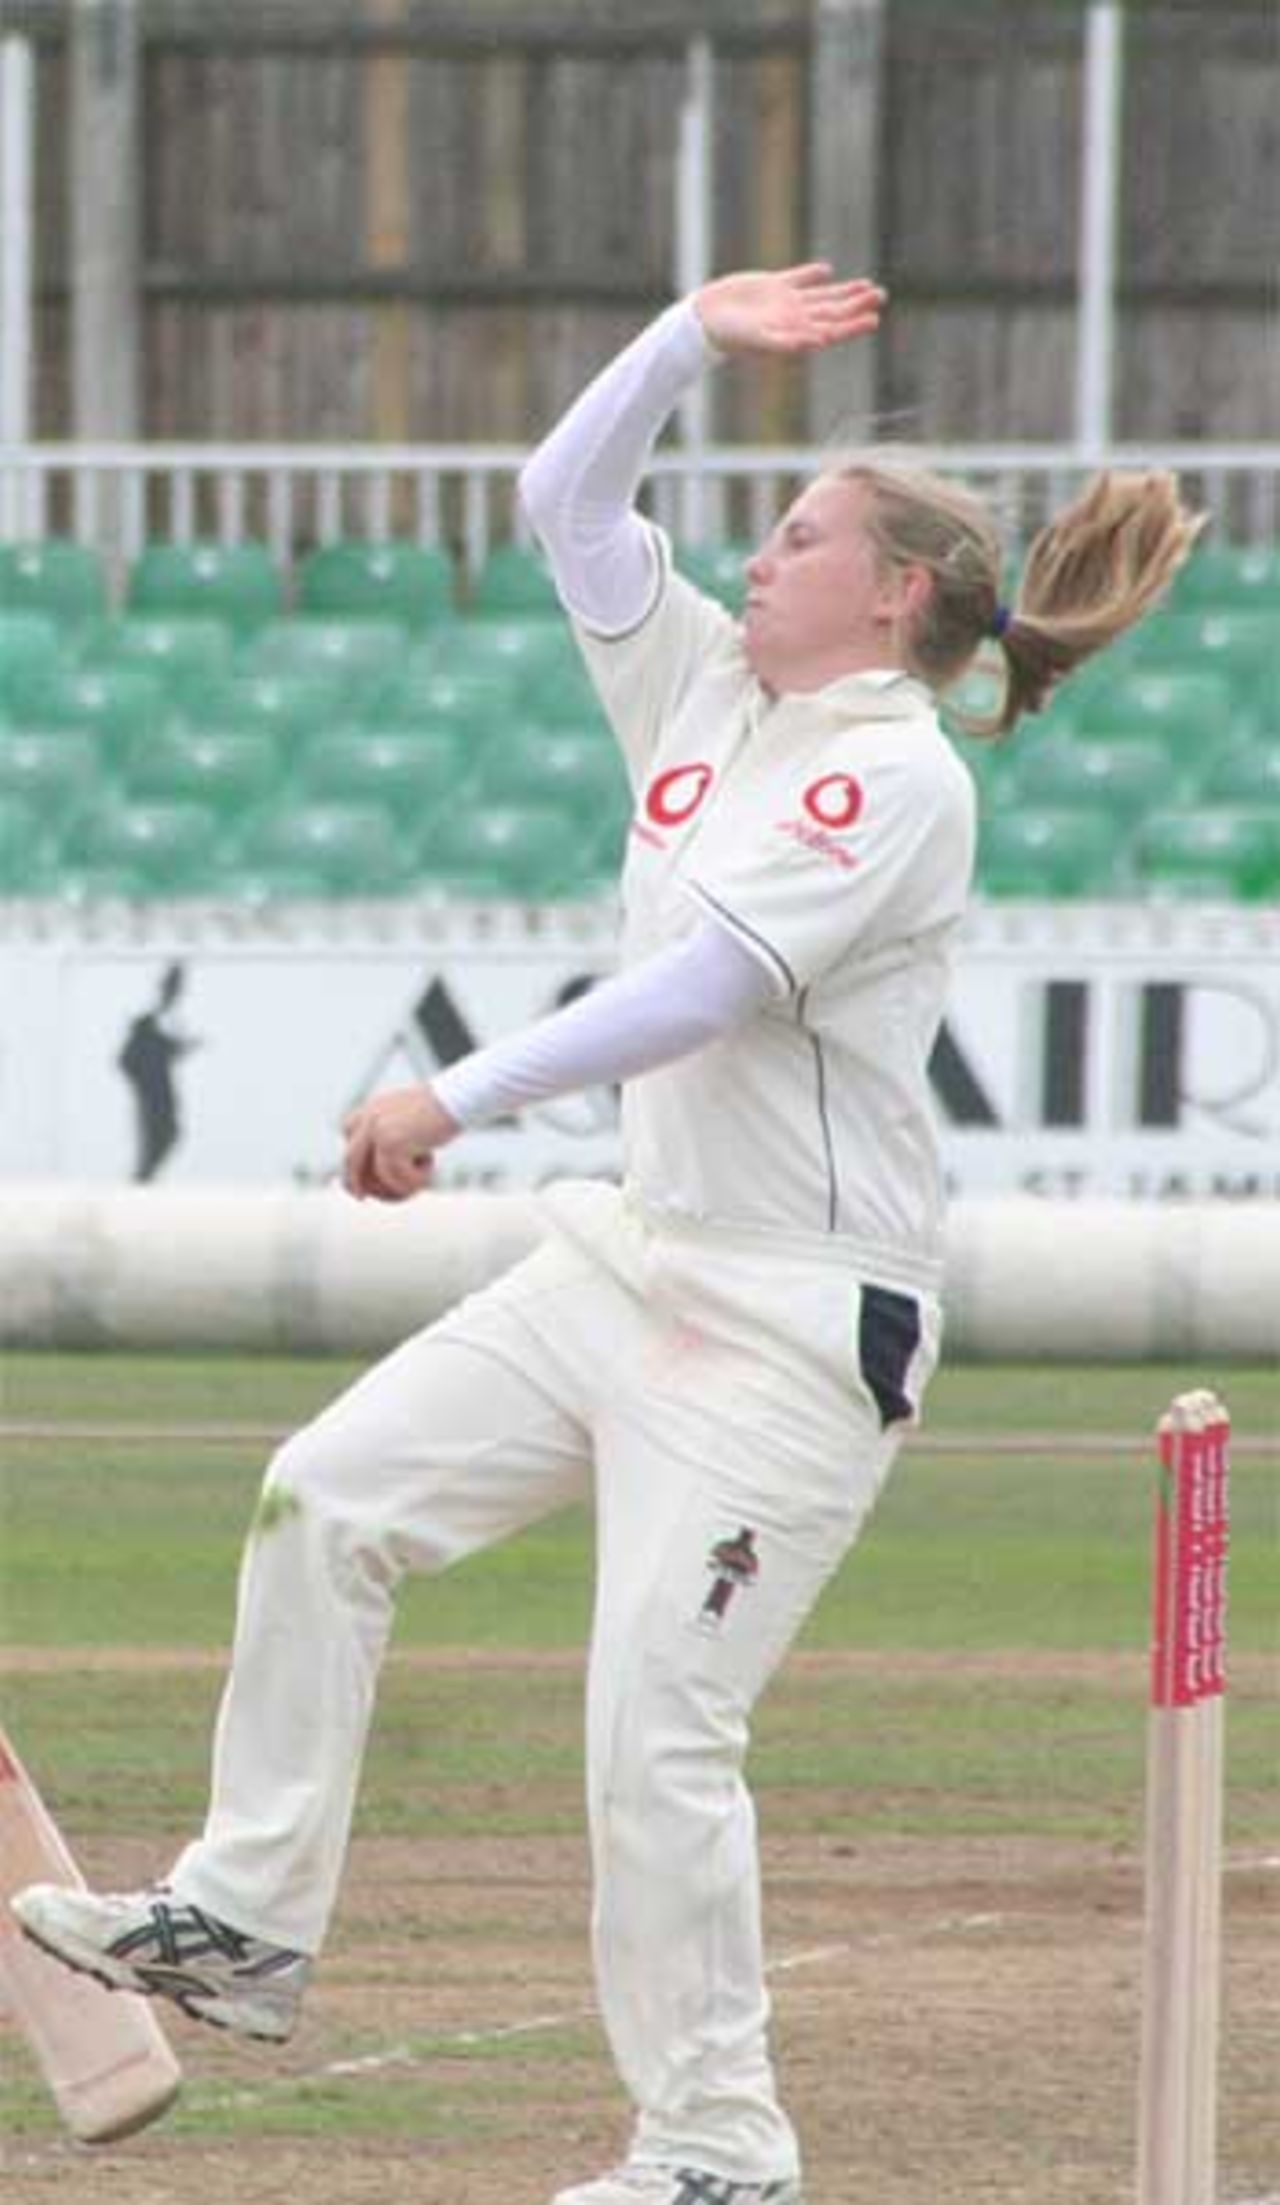 Holly Colvin bowls during the first Test at Leicester, which resulted in a draw, England women v India women, Grace Road, 8 August, 2006